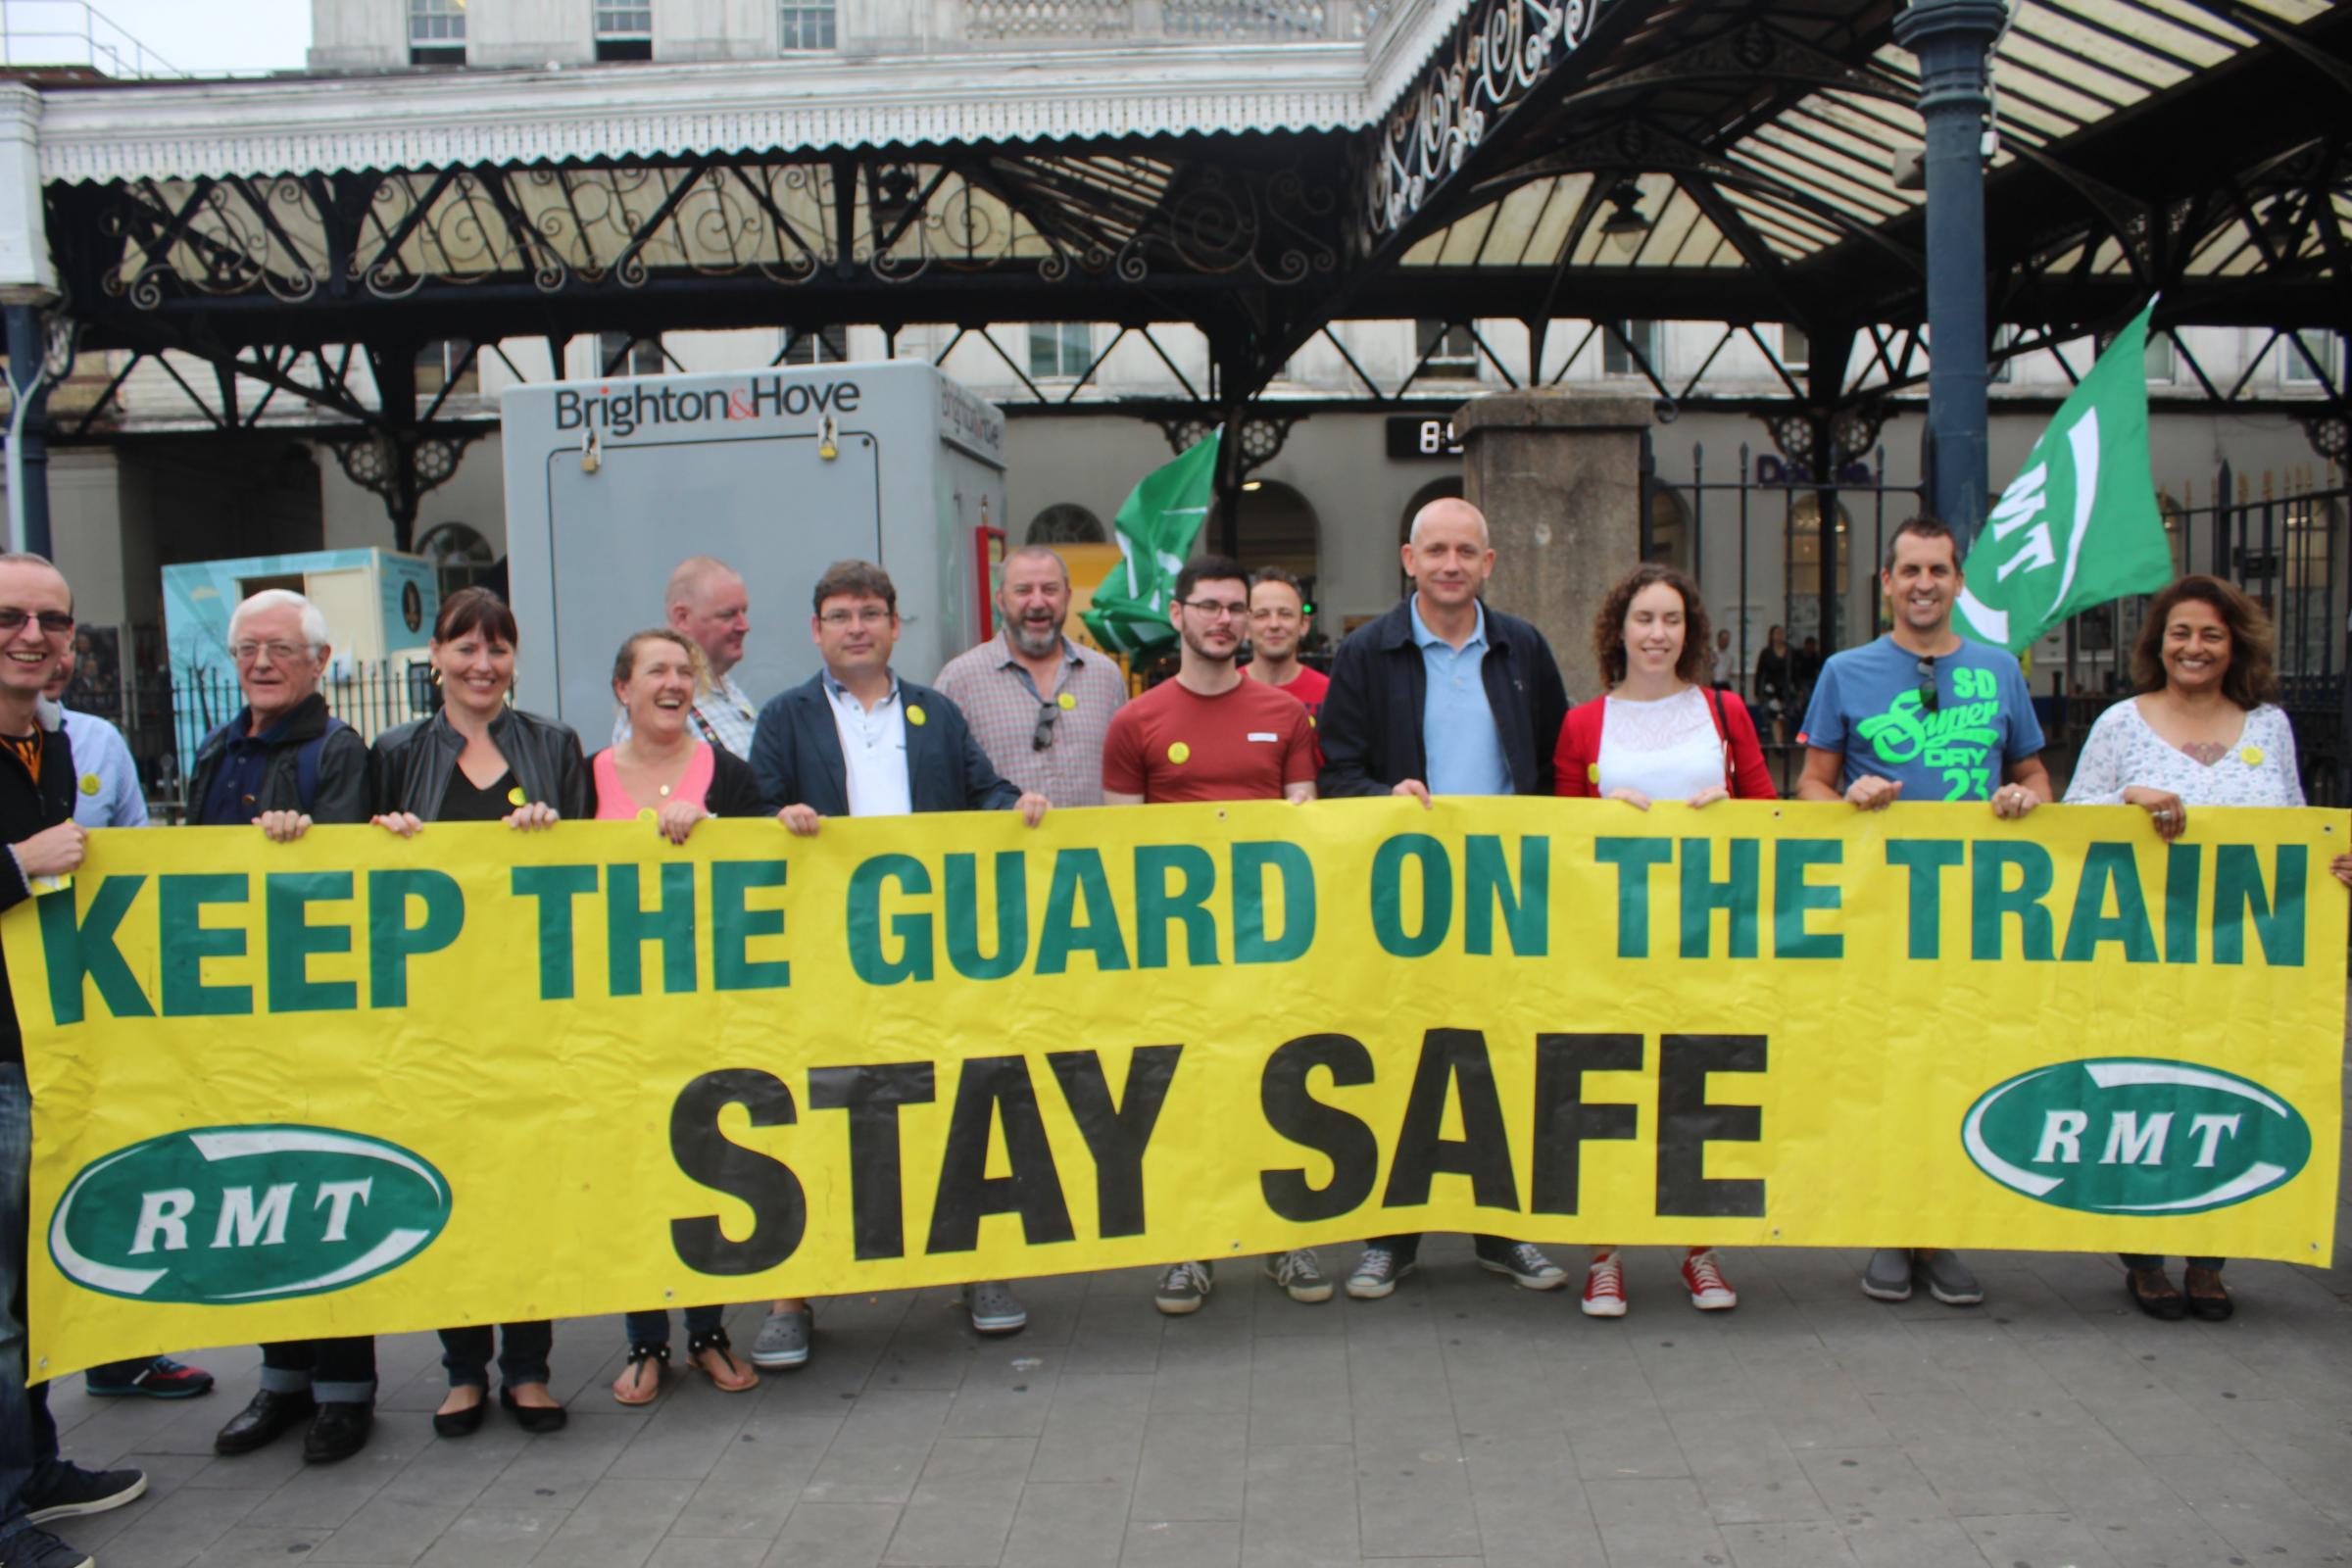 RMT union plans protest rally over Southern Railway guards row